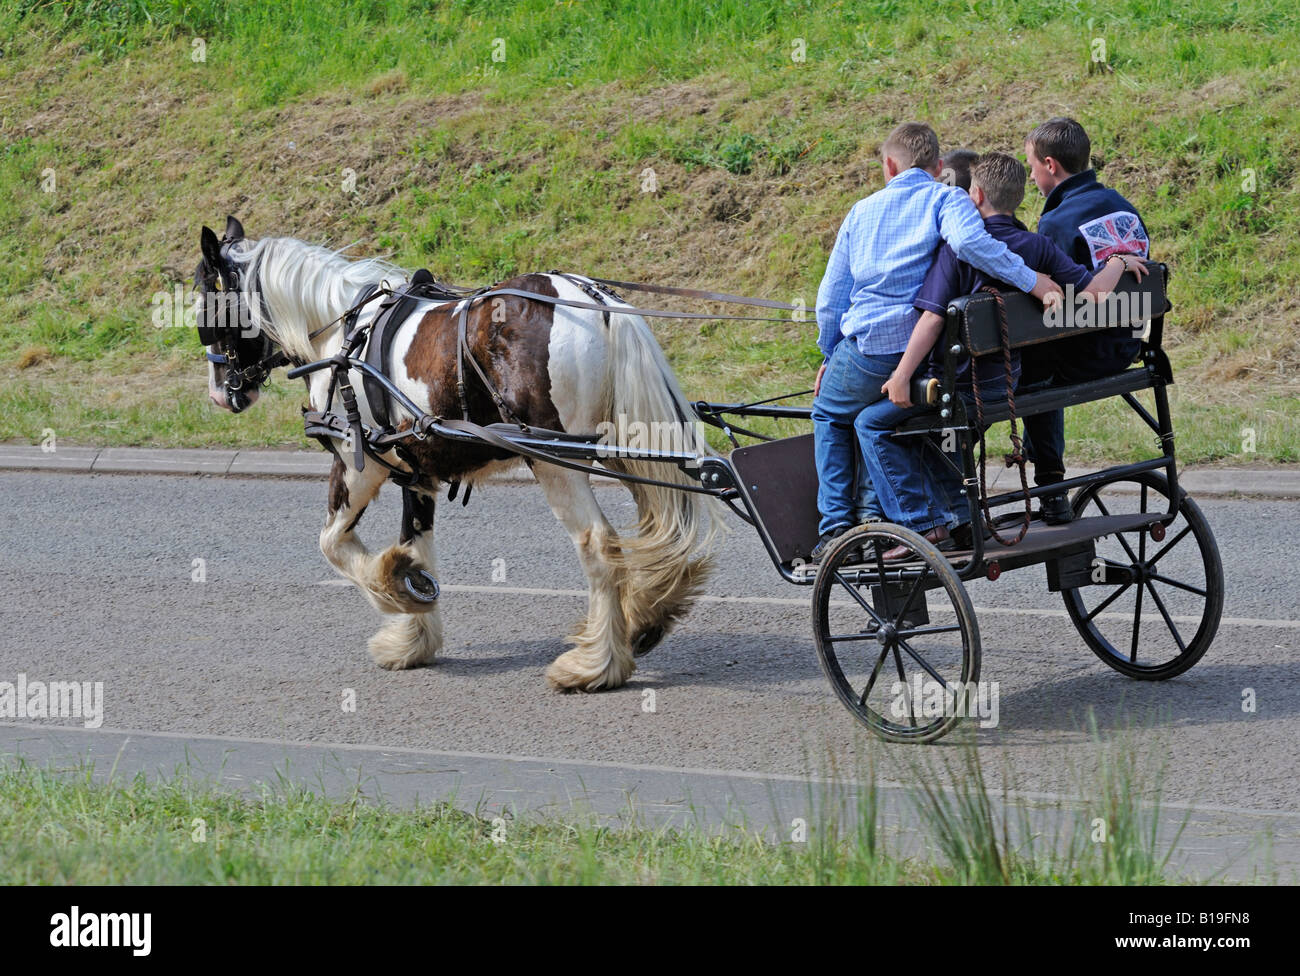 Four gypsy traveller boys driving horse and trap. Appleby Horse Fair. Appleby-in-Westmorland, Cumbria, England, United Kingdom. Stock Photo